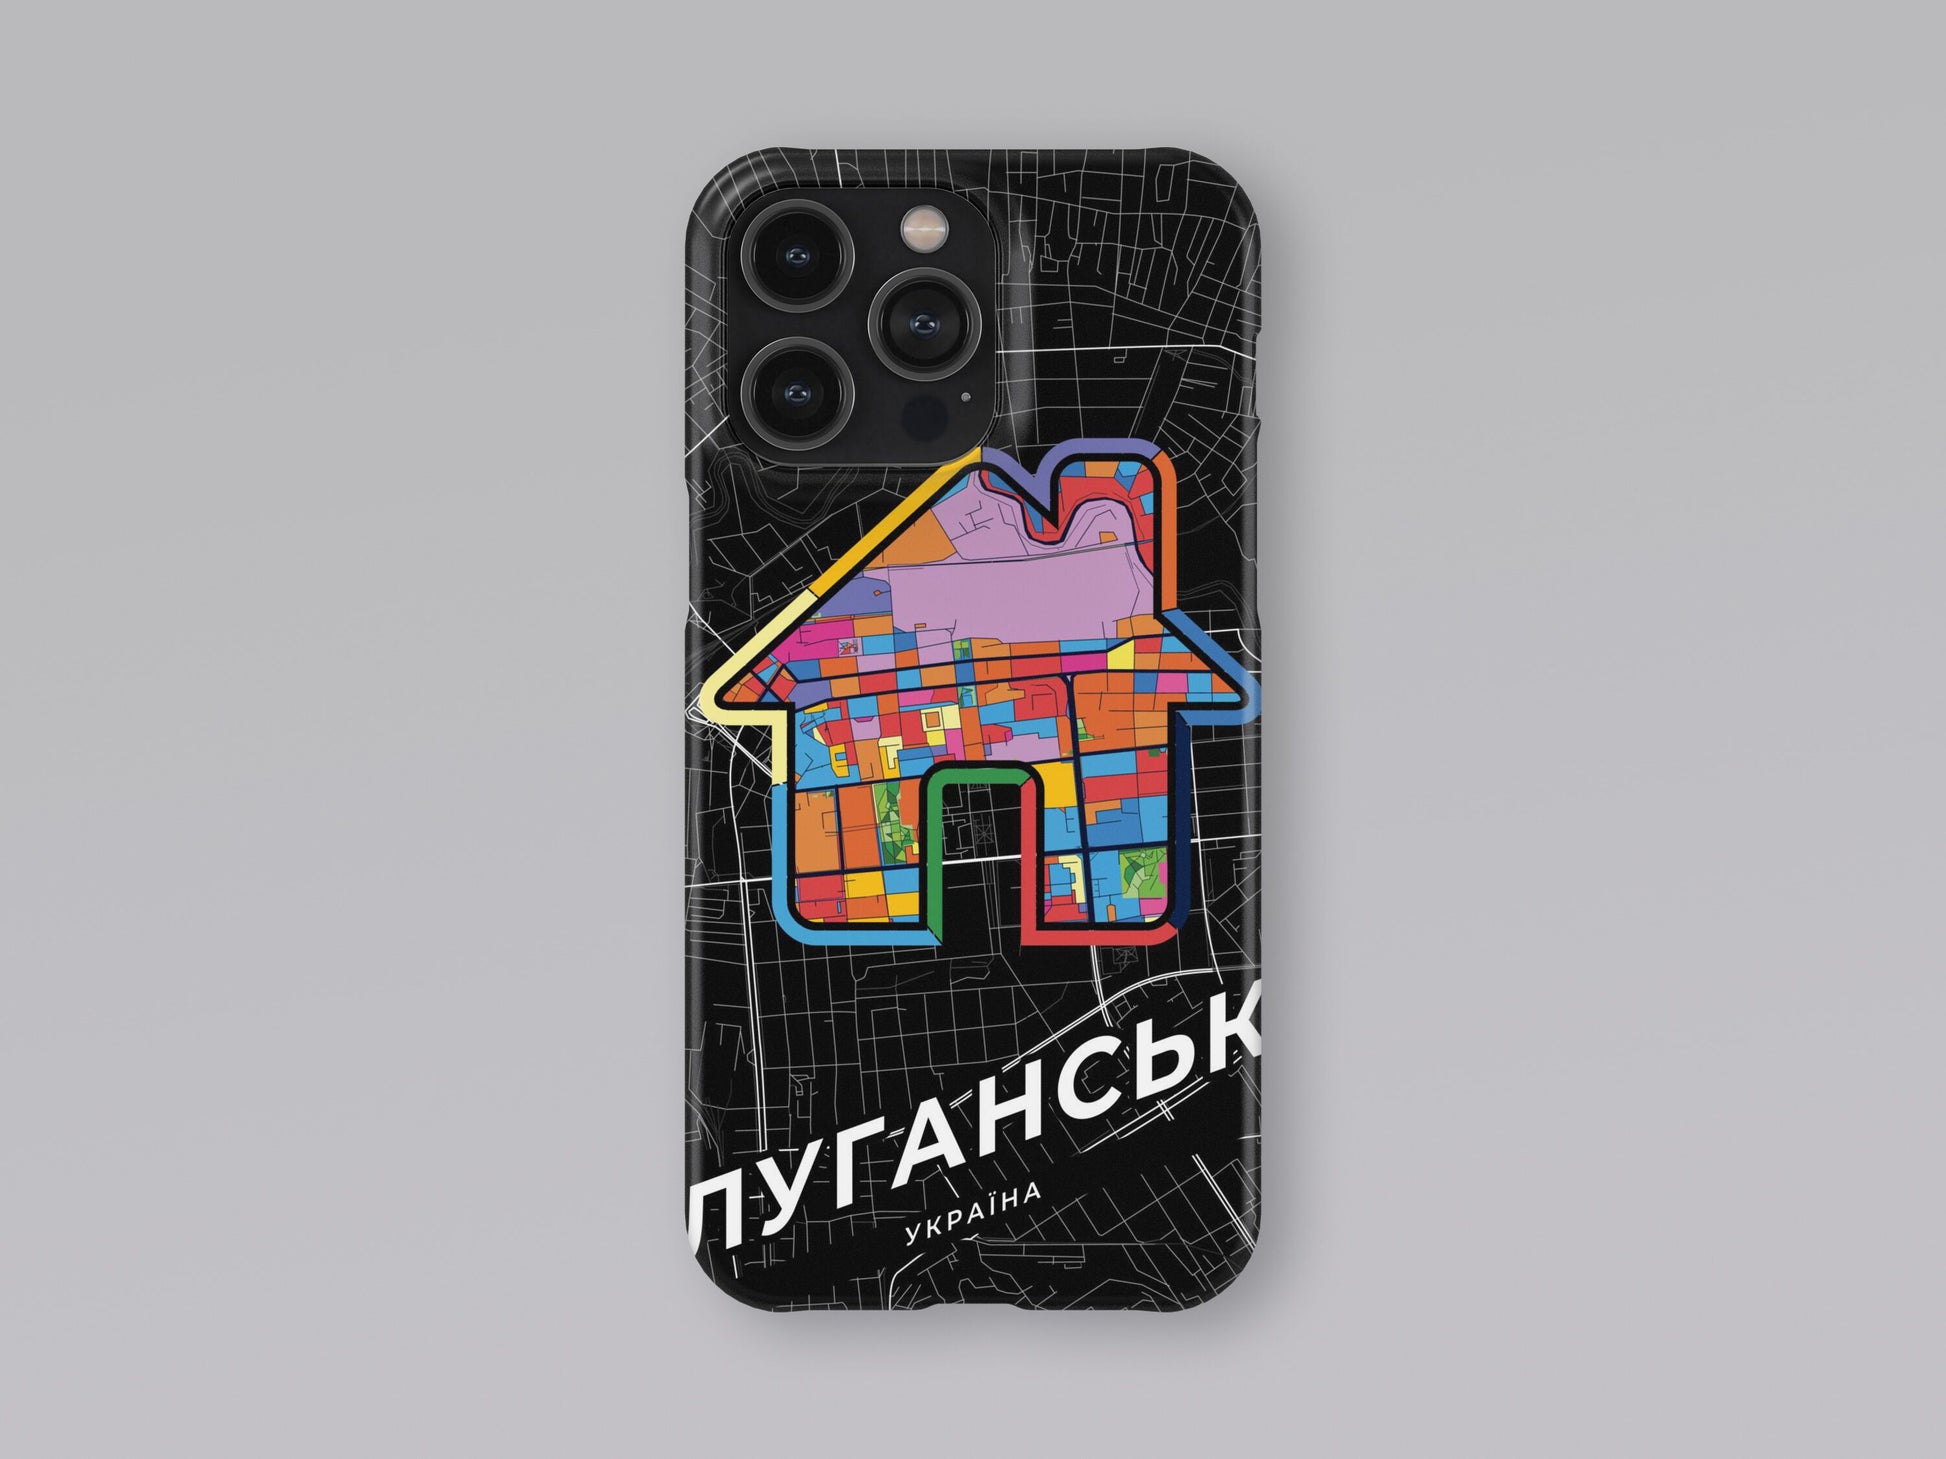 Luhansk Ukraine slim phone case with colorful icon. Birthday, wedding or housewarming gift. Couple match cases. 3